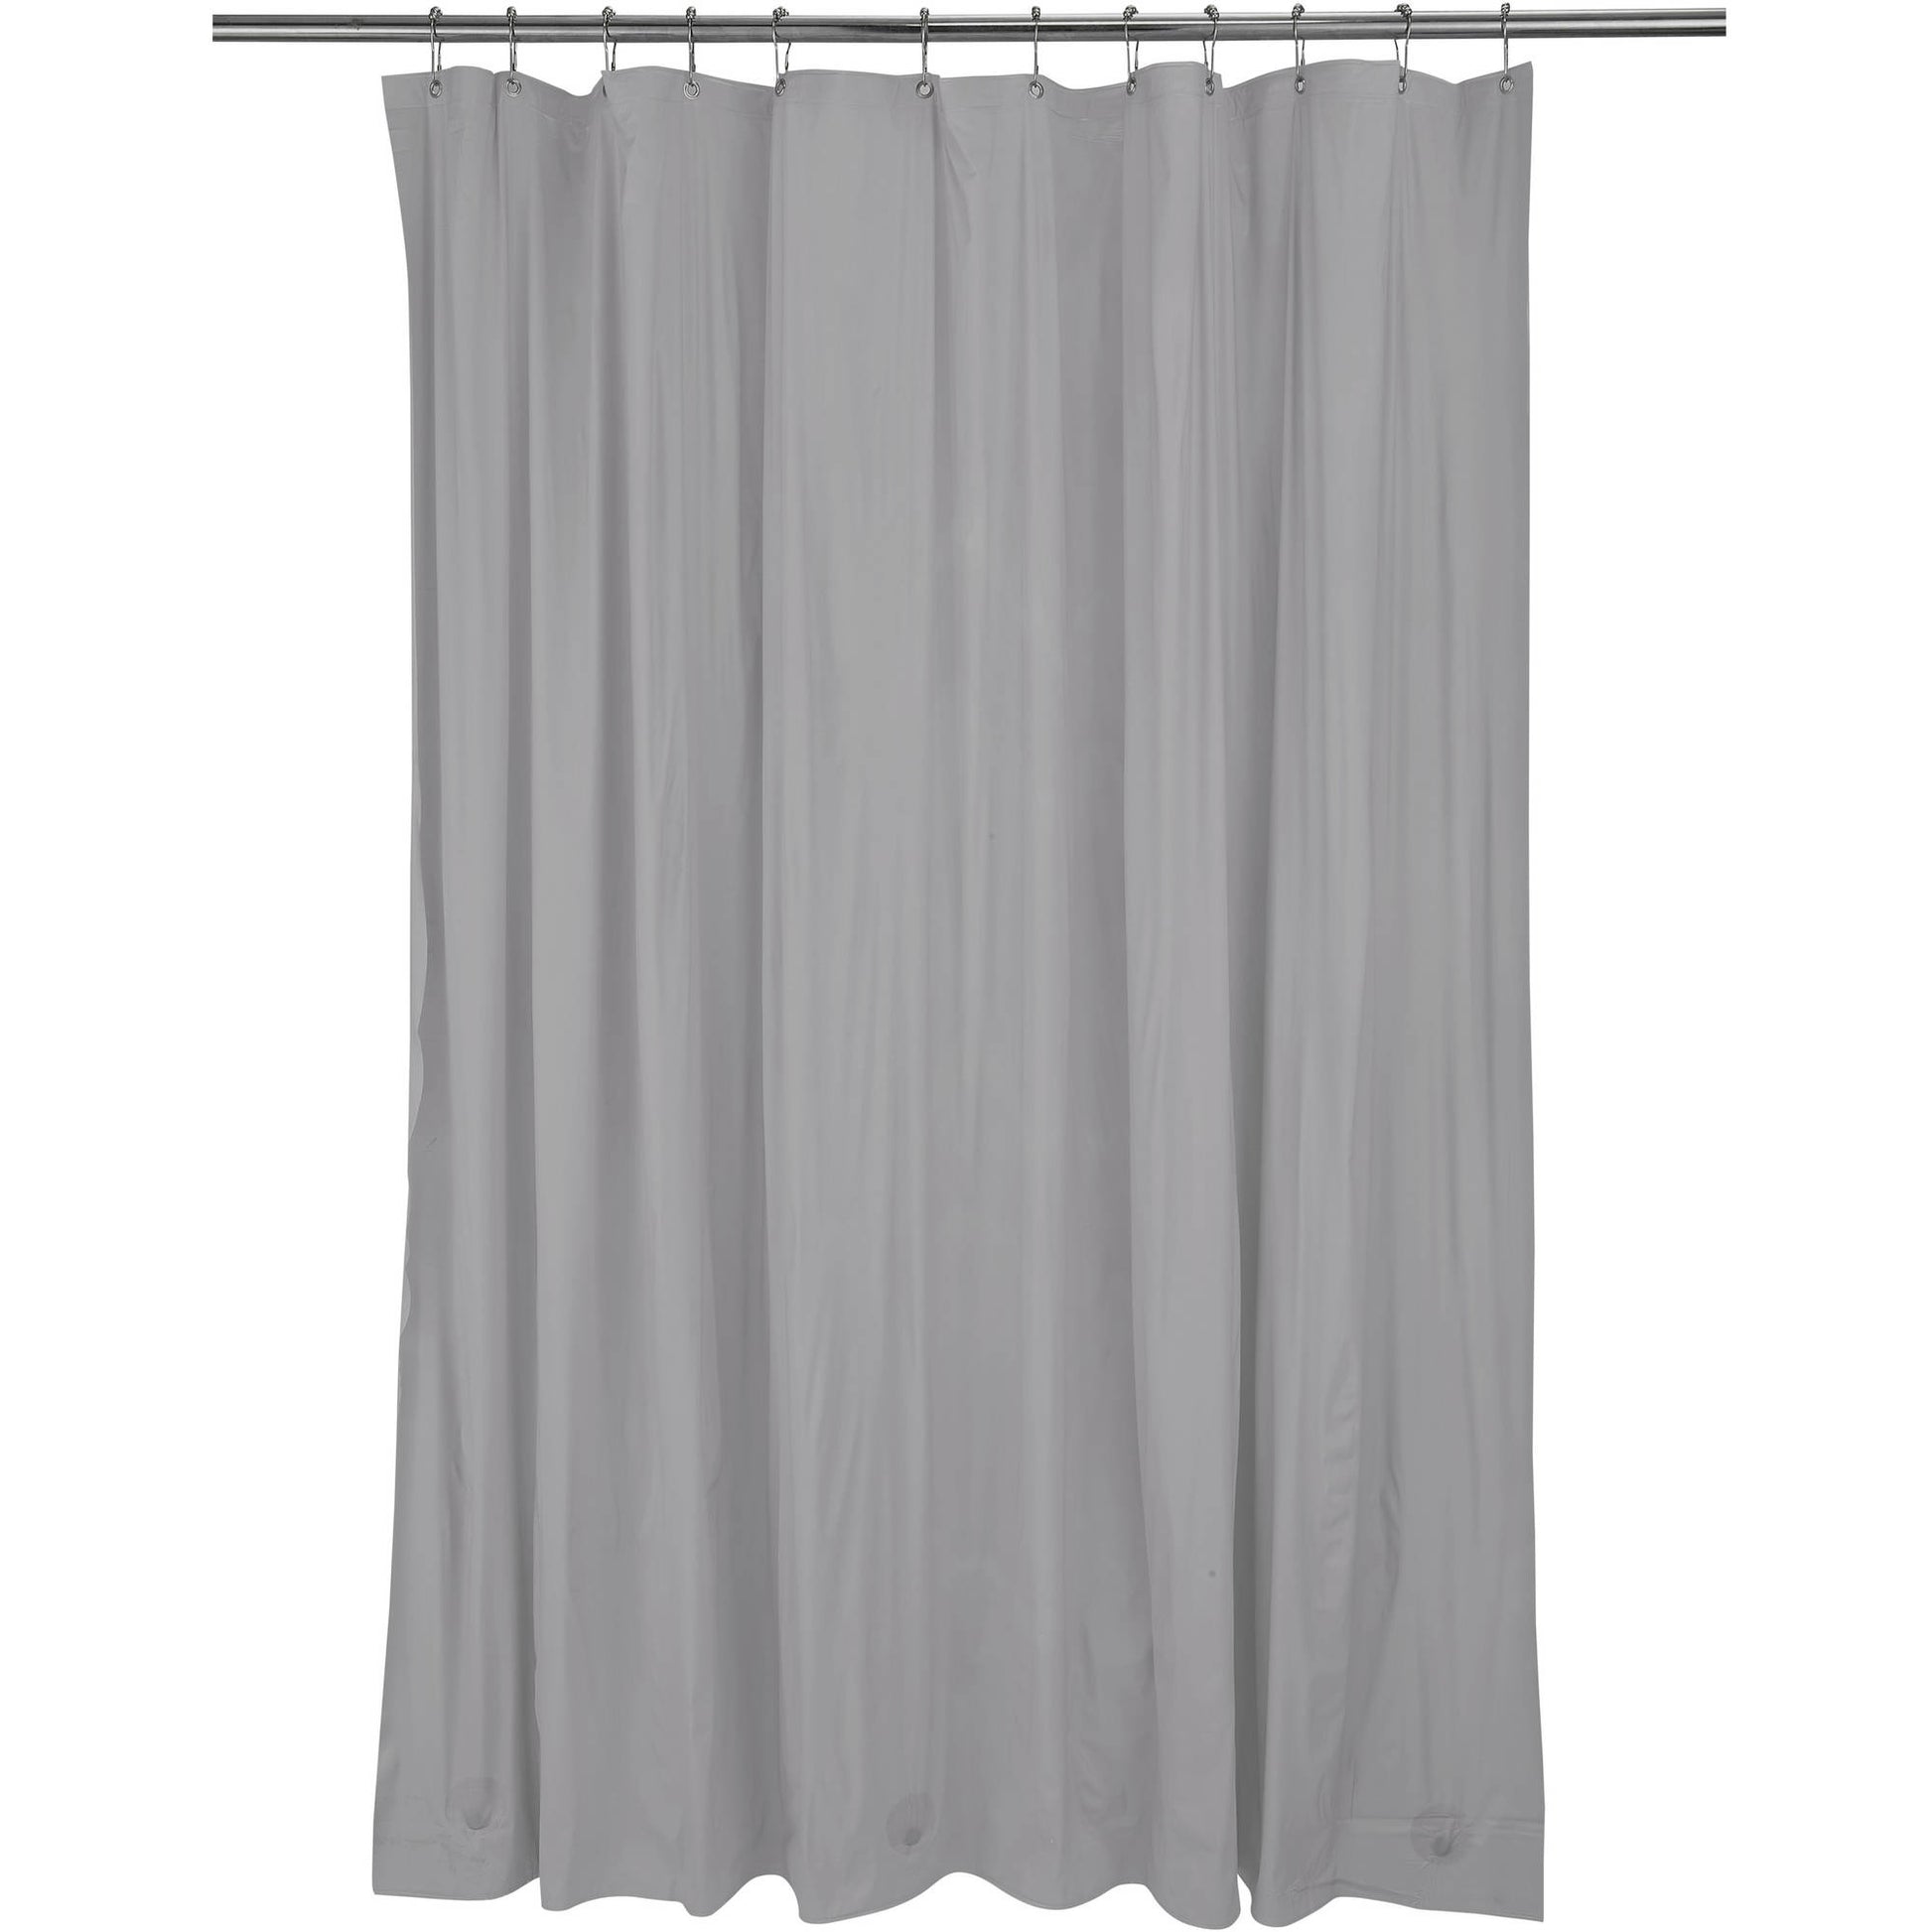 Bath Bliss Heavy Shower Curtain Liner in Silver